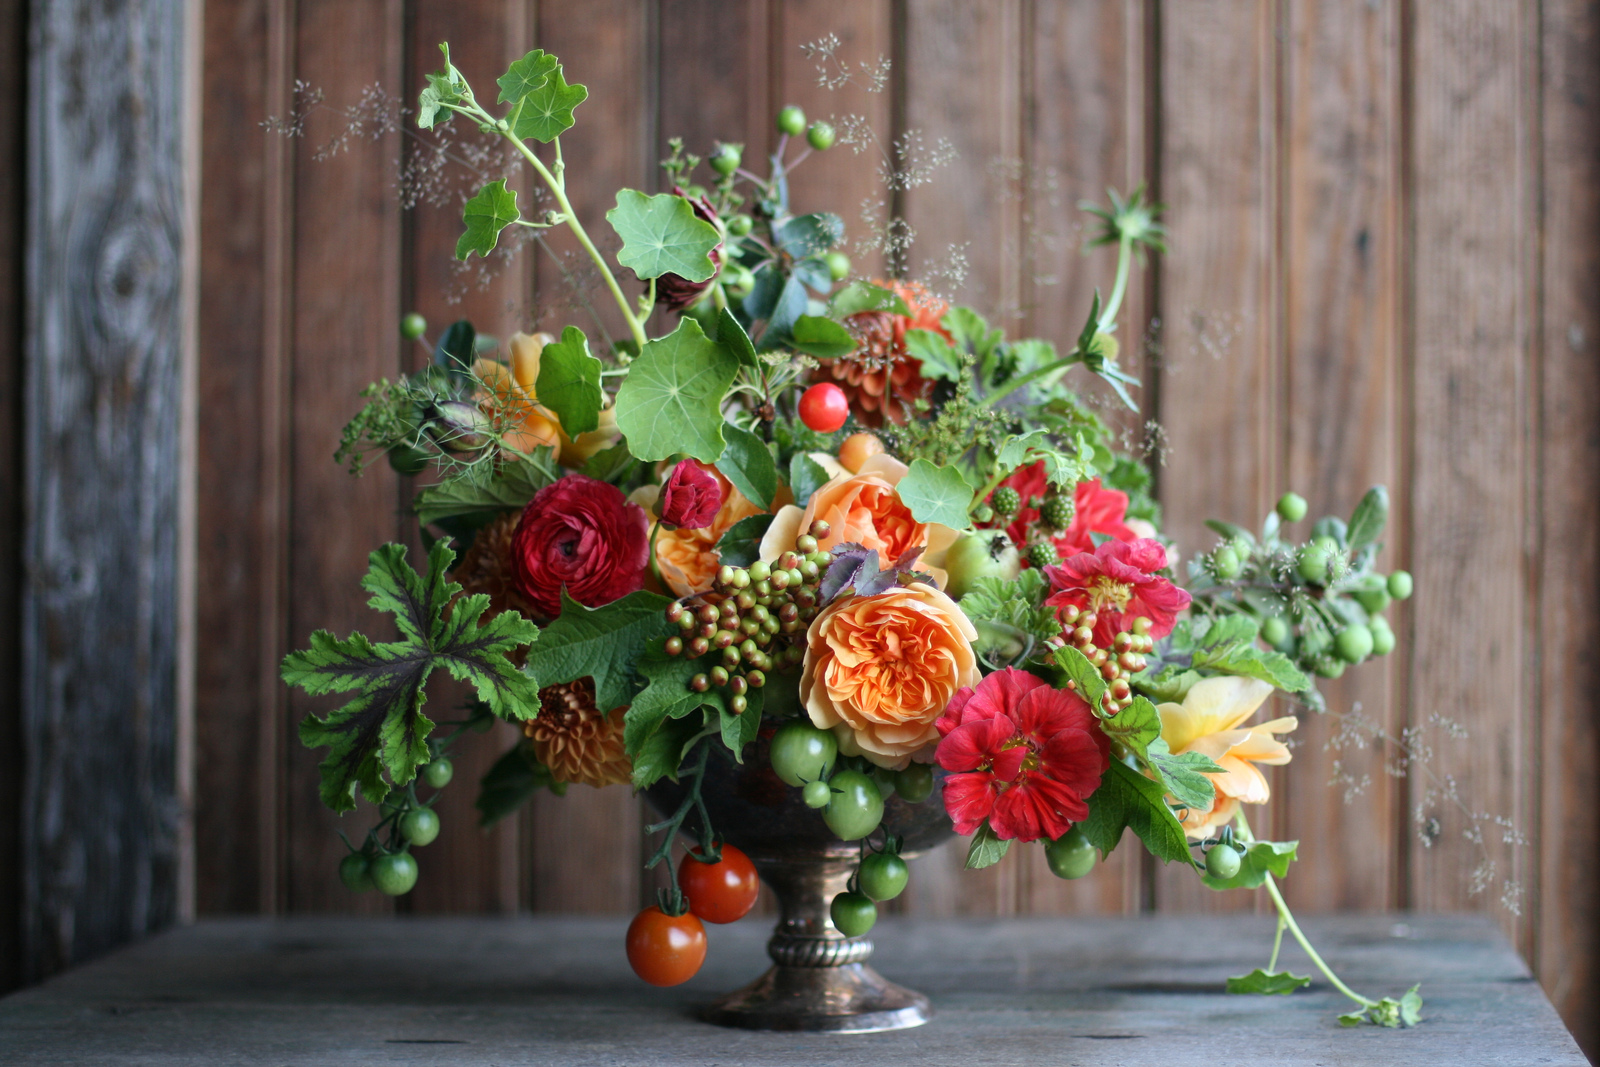 A flower arrangement with tomatoes